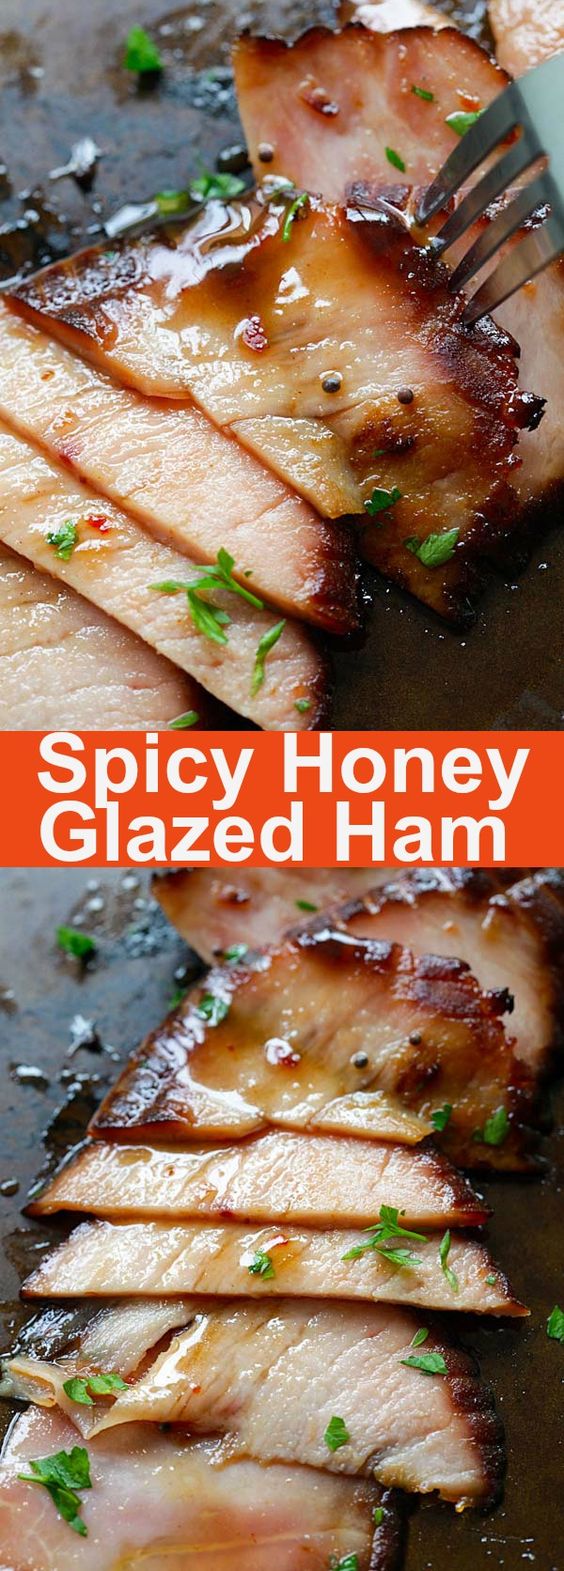 Spicy Honey Glazed Ham - complete your holiday dinner with this amazing glazed ham recipe in a sweet and sticky honey sauce. It's so easy to make and crazy delicious | rasamalaysia.com